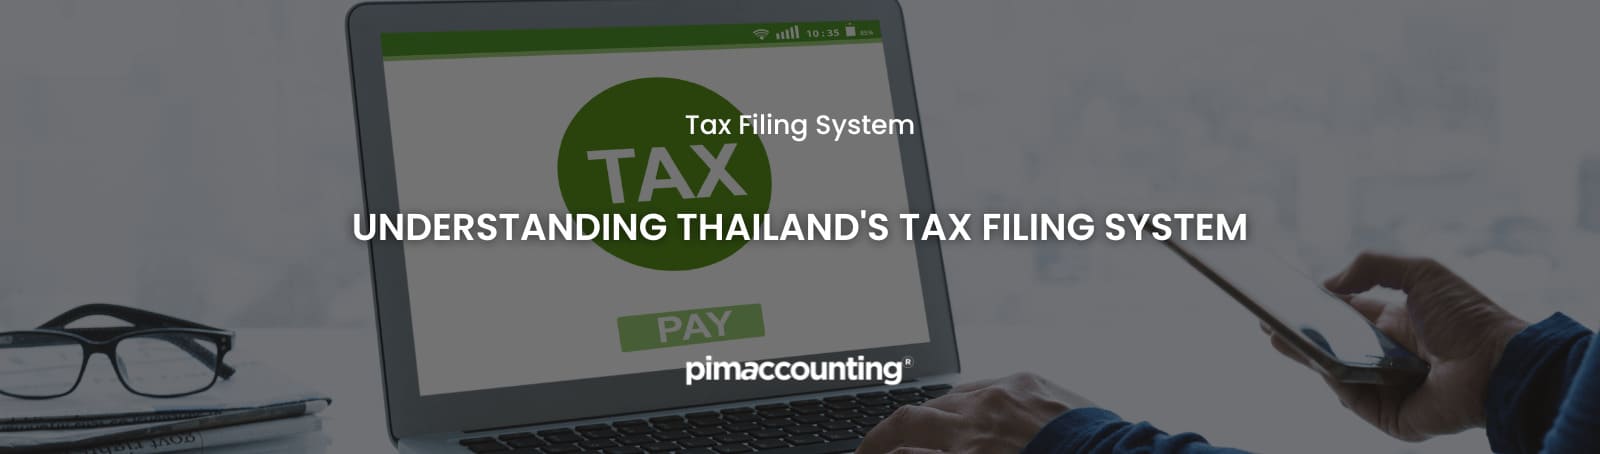 Thailand's Tax Filing System - Pimaccounting